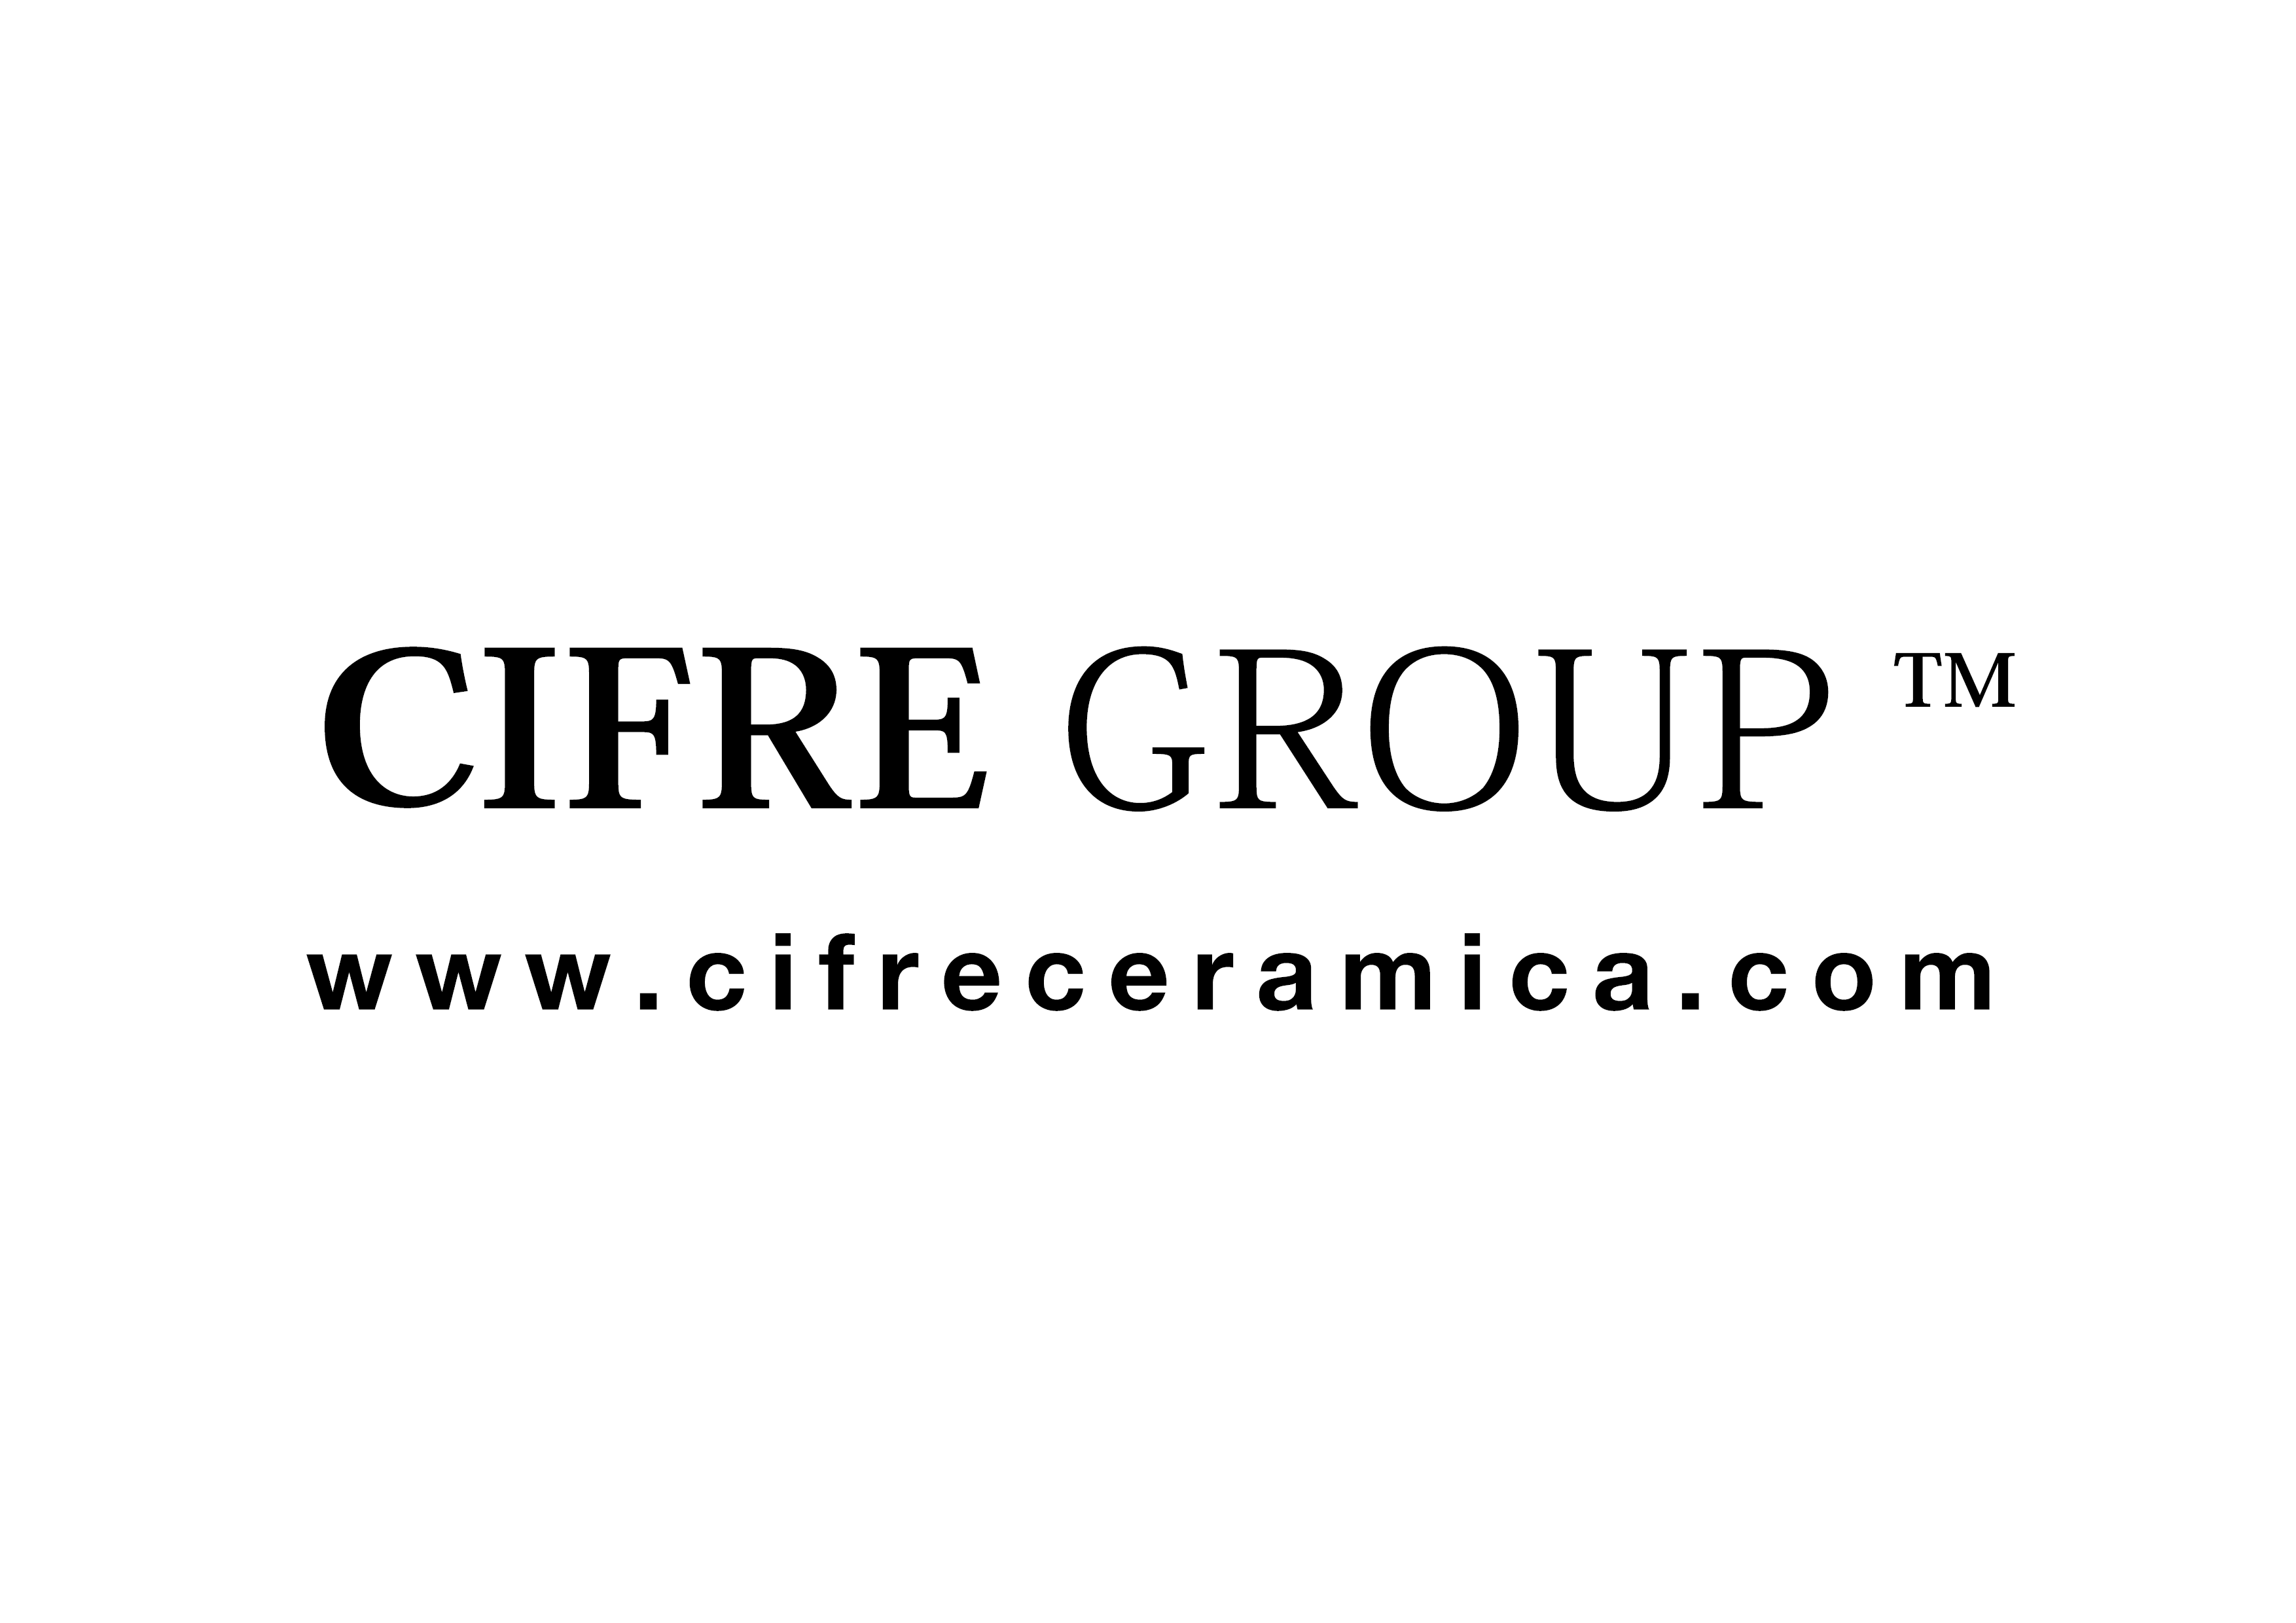 Cifre Group